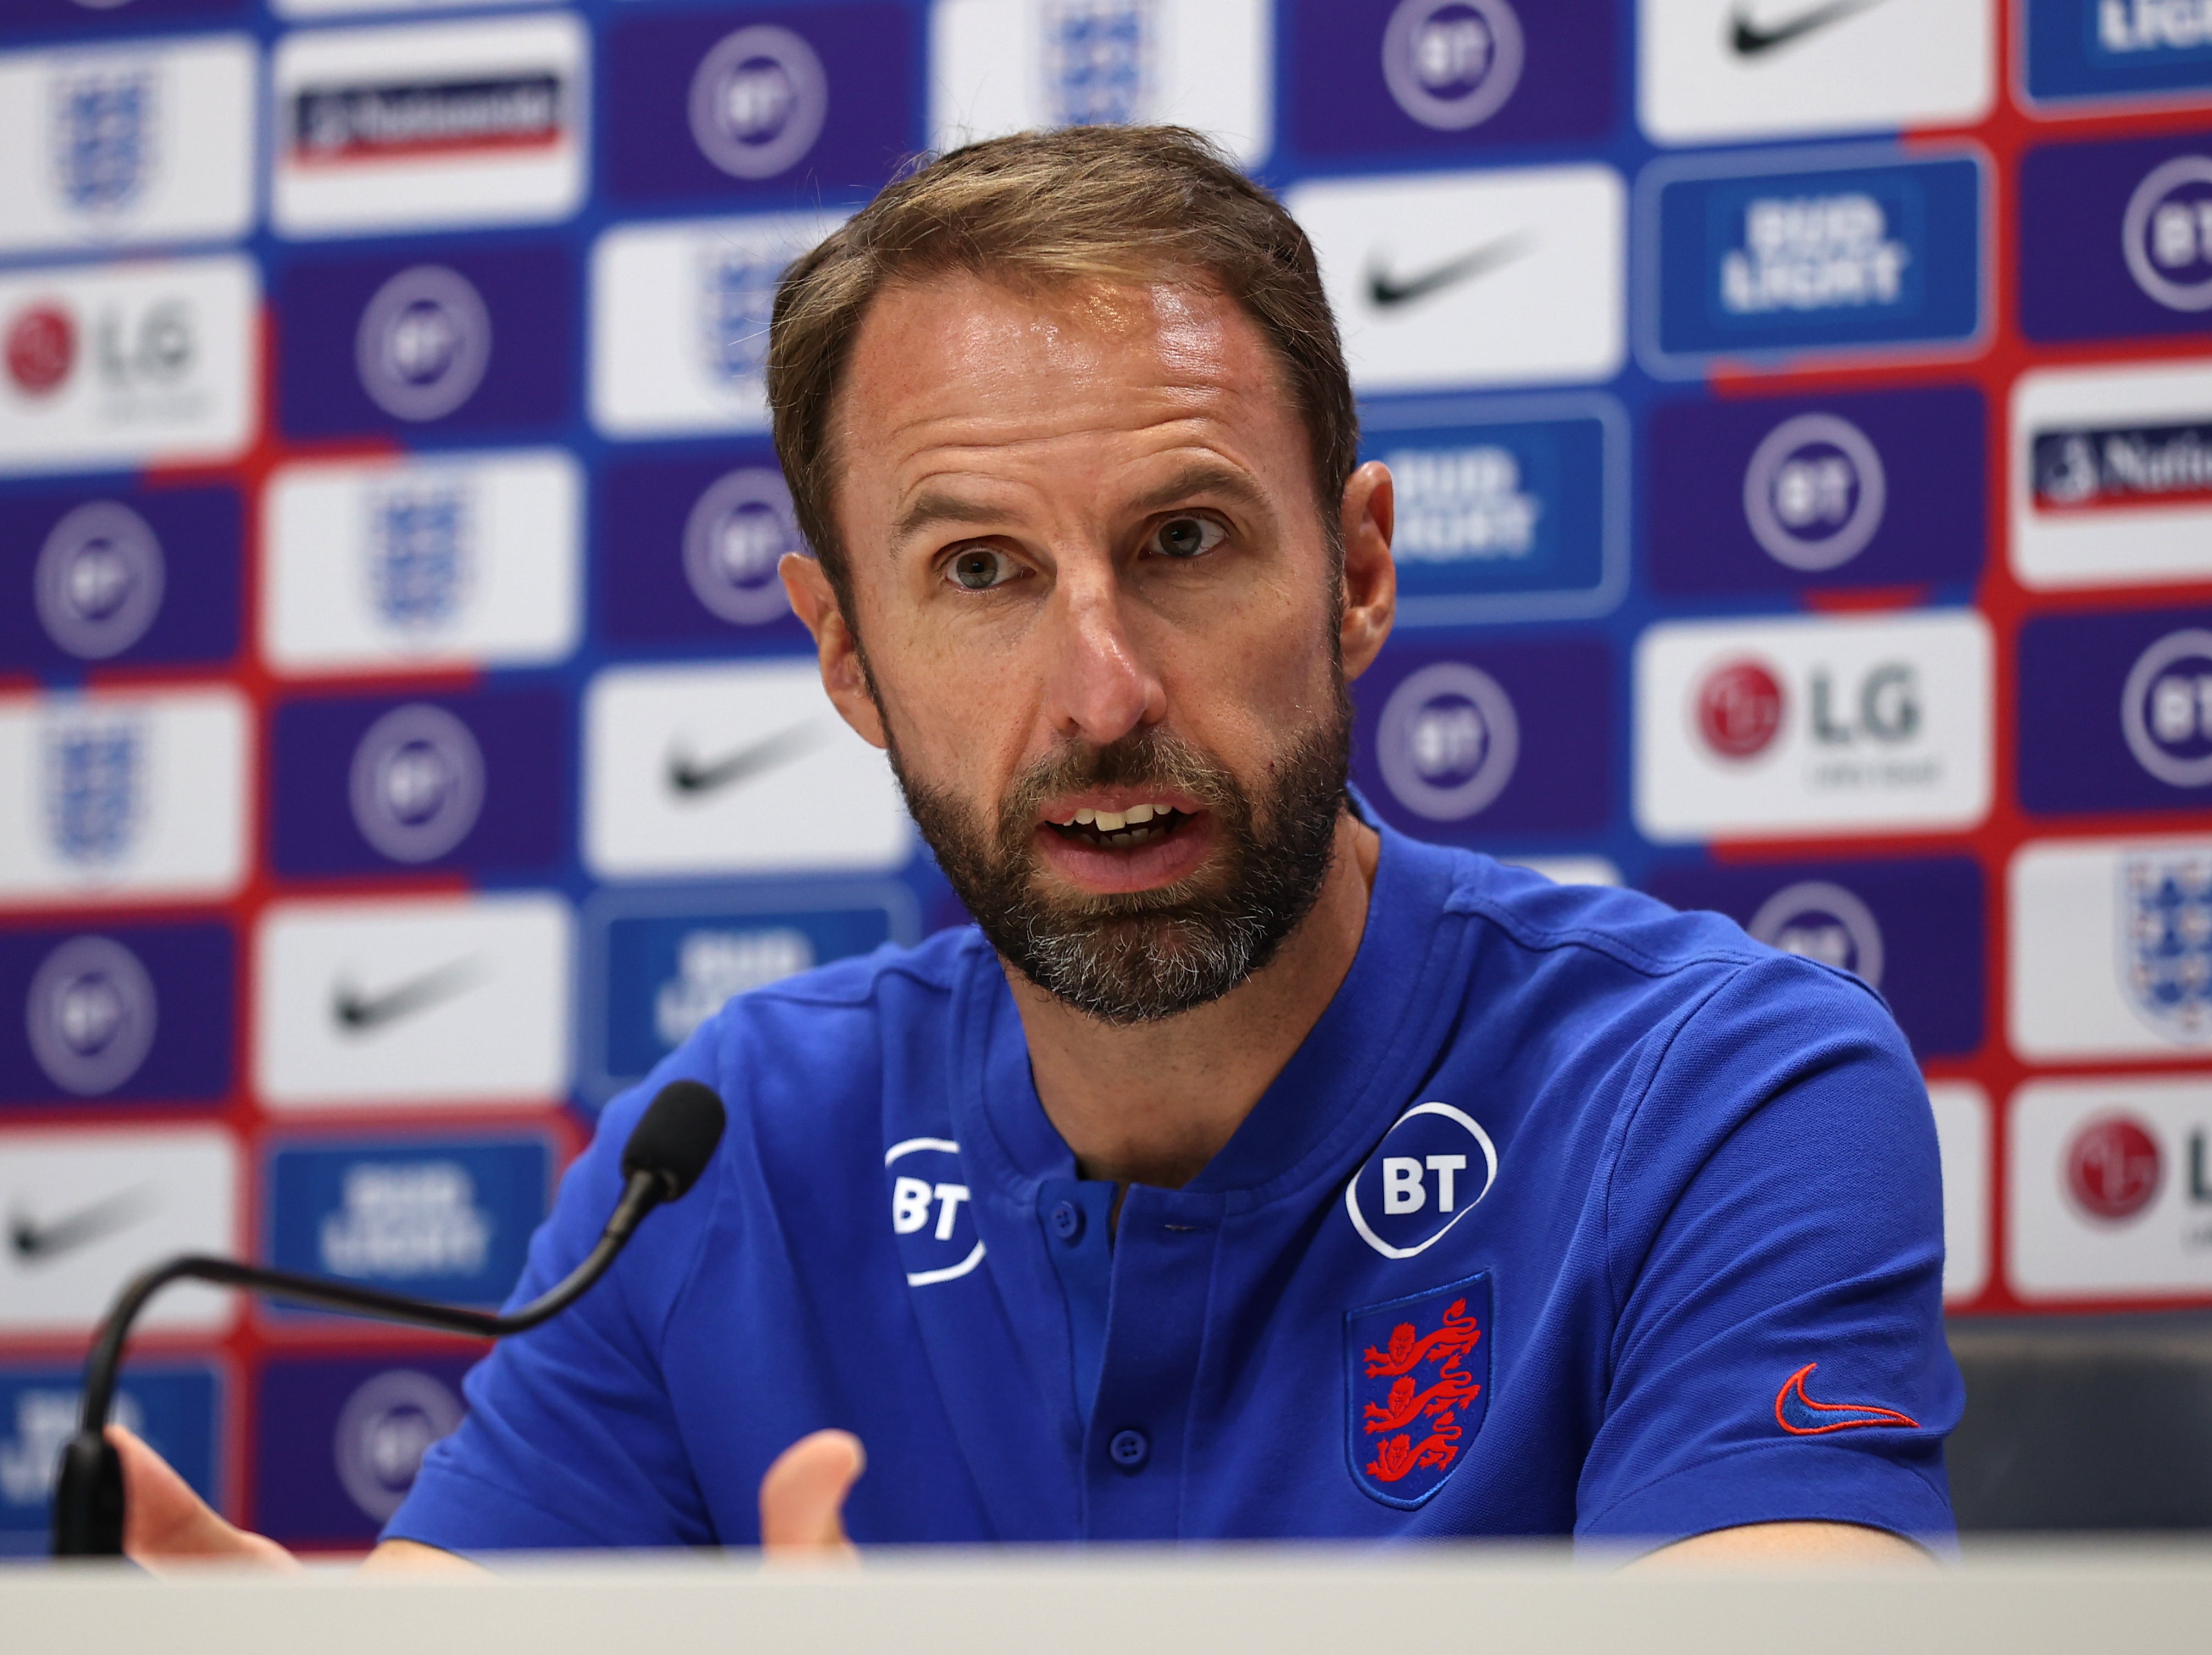 Gareth Southgate’s contract as England head coach is set to expire after the 2022 World Cup